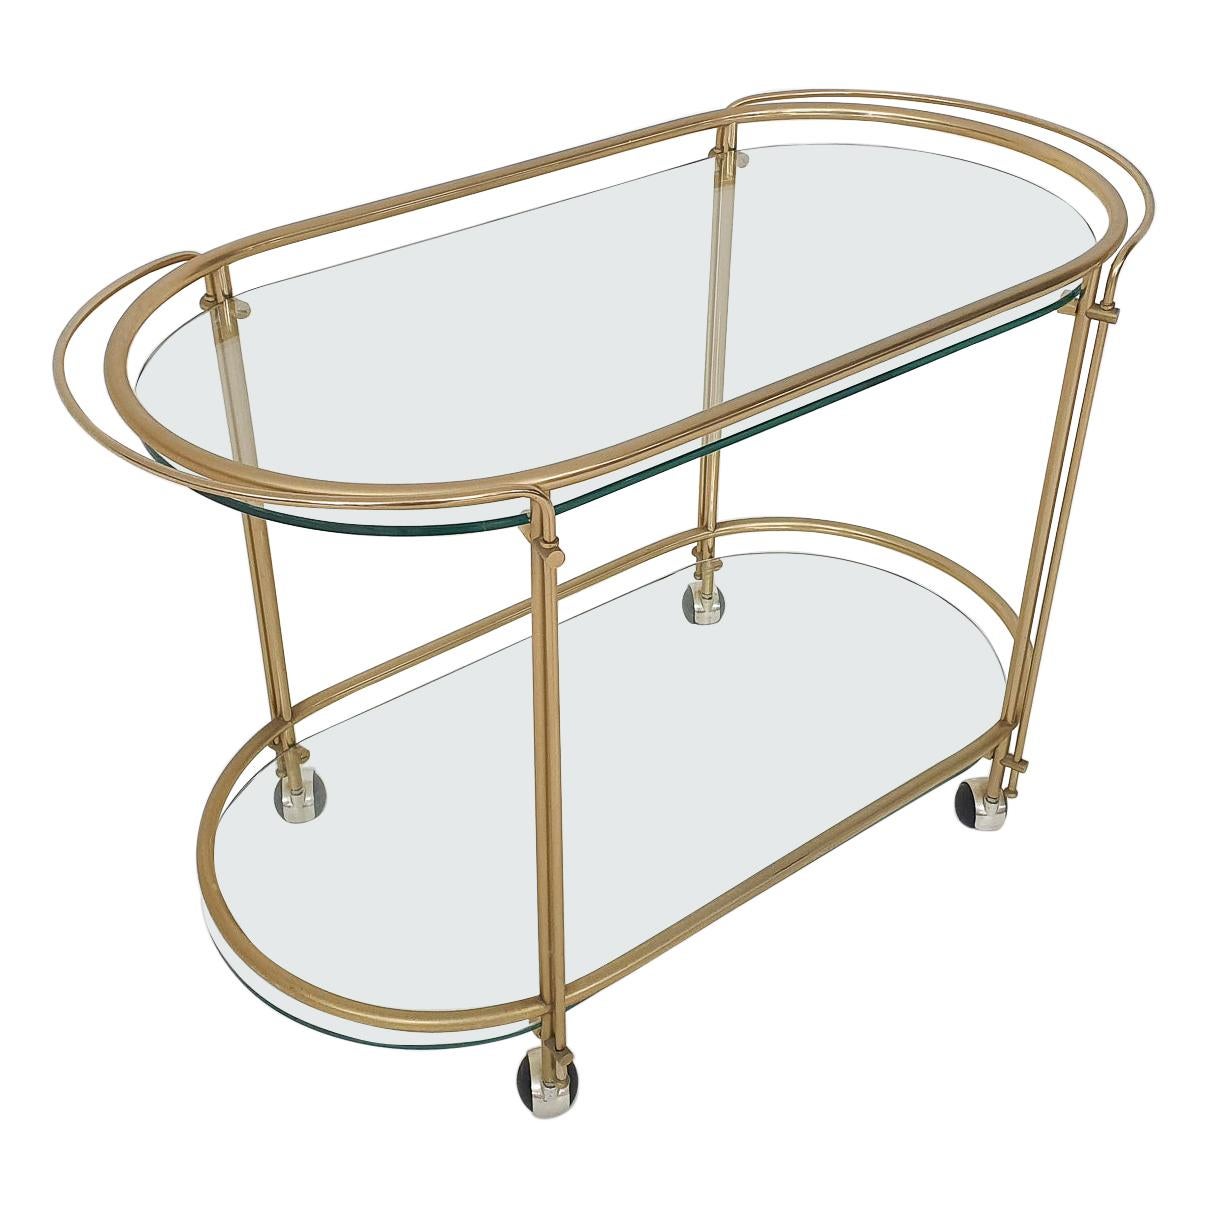 Mid-Century Modern Glass and Gold Serving Trolley or Bar Cart, 1970's